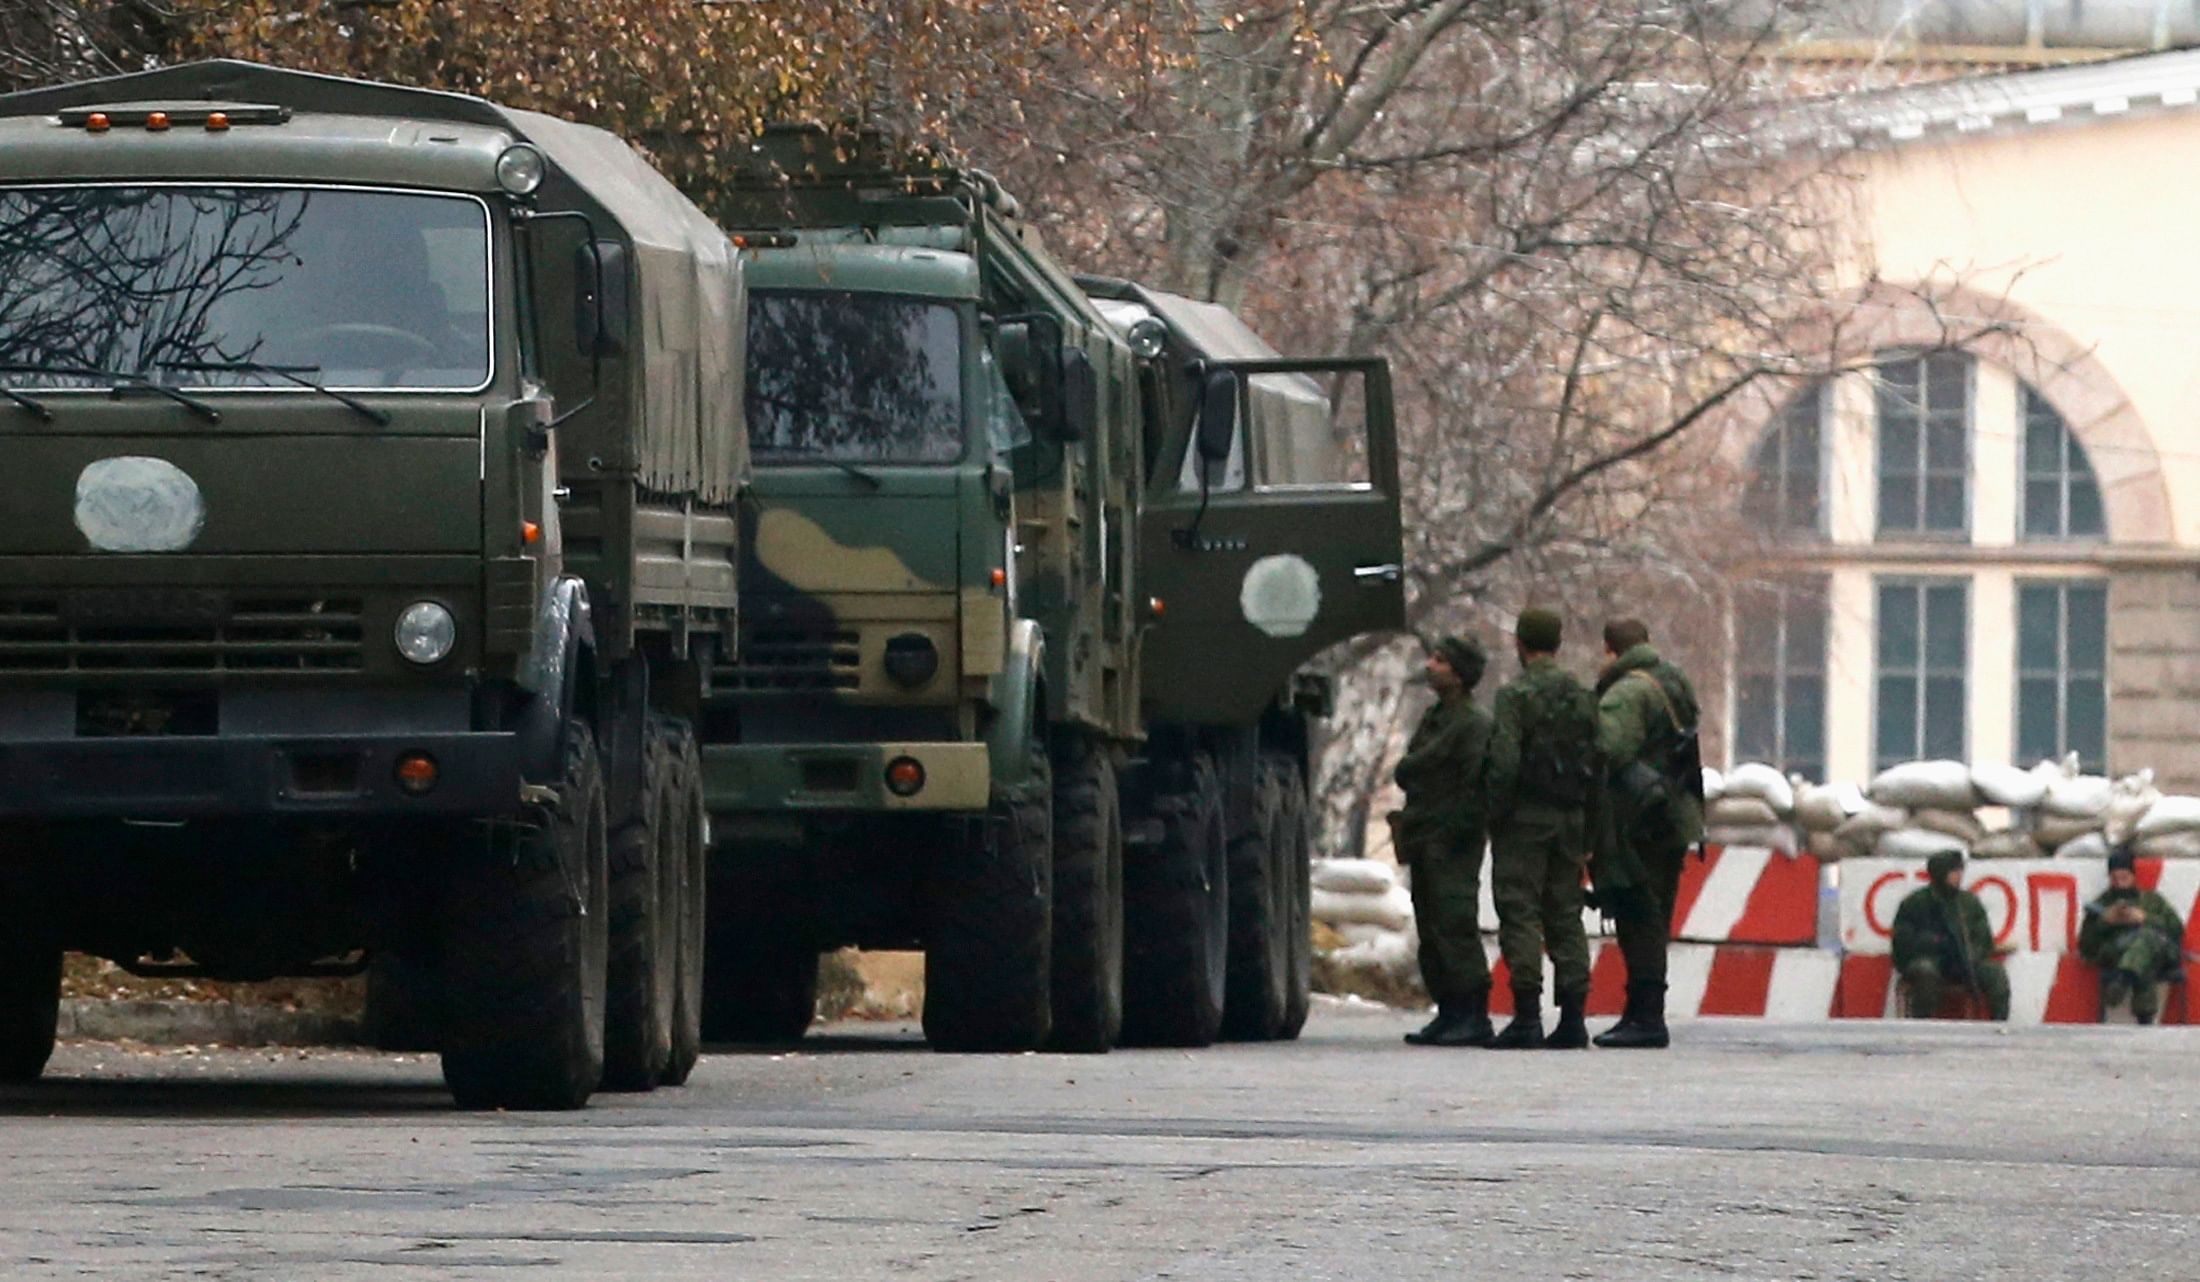 Armed people and military trucks are seen near a checkpoint outside a building on the territory controlled by the self-proclaimed Donetsk People's Republic in Donetsk, eastern Ukraine, 12 November, 2014. Photo: Reuters